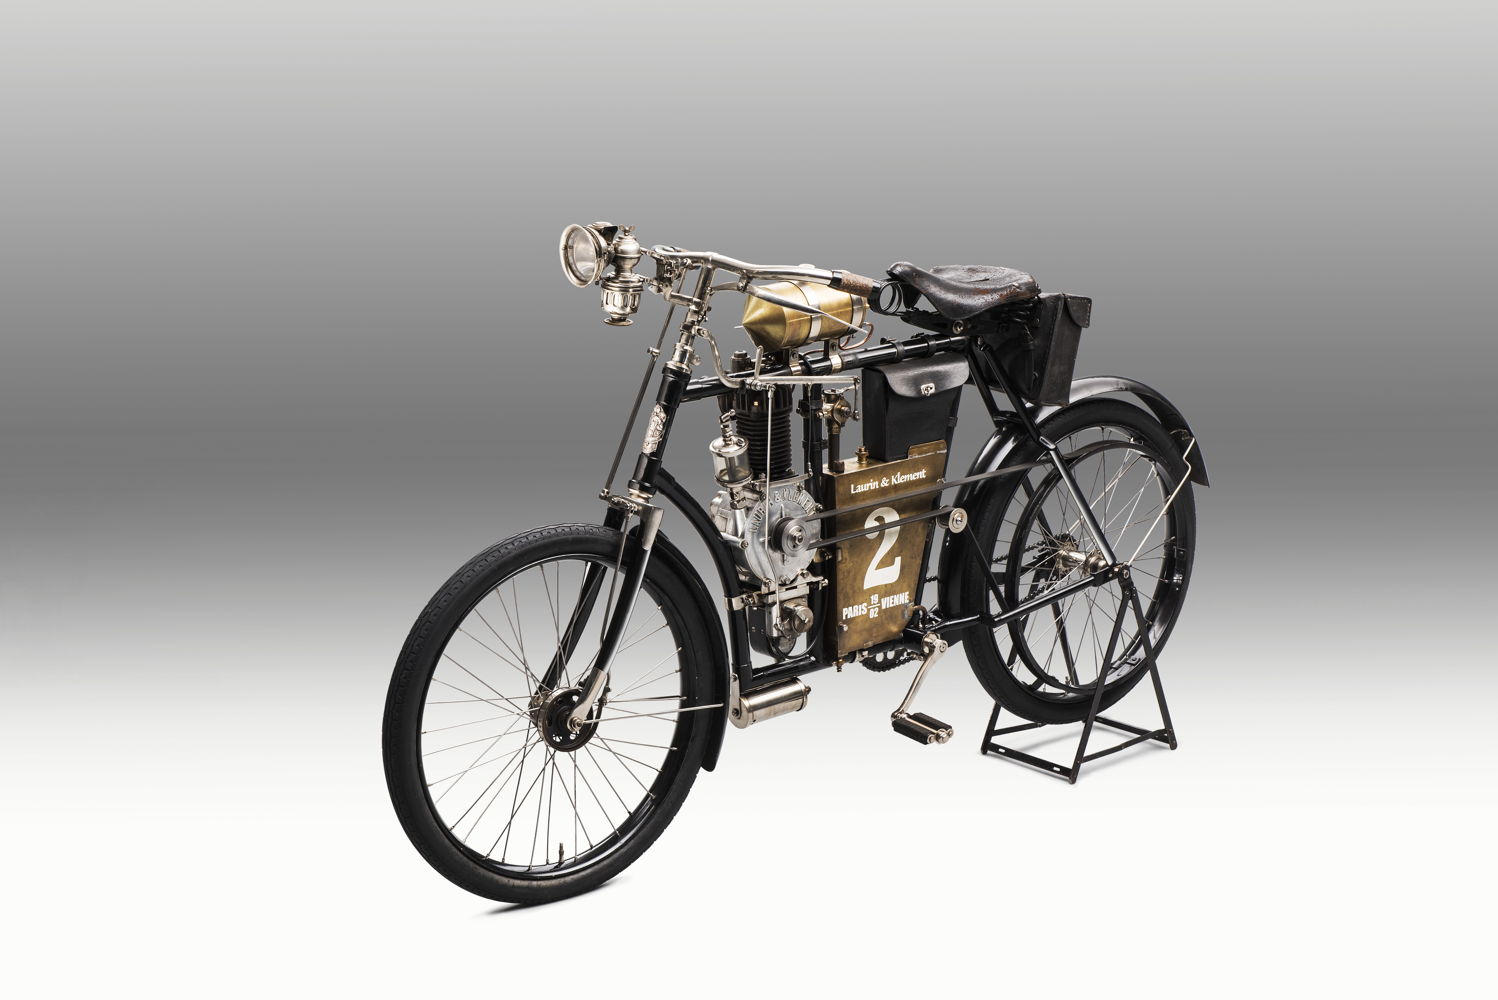 Laurin & Klement’s second motorbike model, the SLAVIA B, plays a very
special role in Laurin & Klement’s corporate history: it was the first
motorbike that Mladá Boleslav-based Laurin & Klement entered in an
international race in 1901.